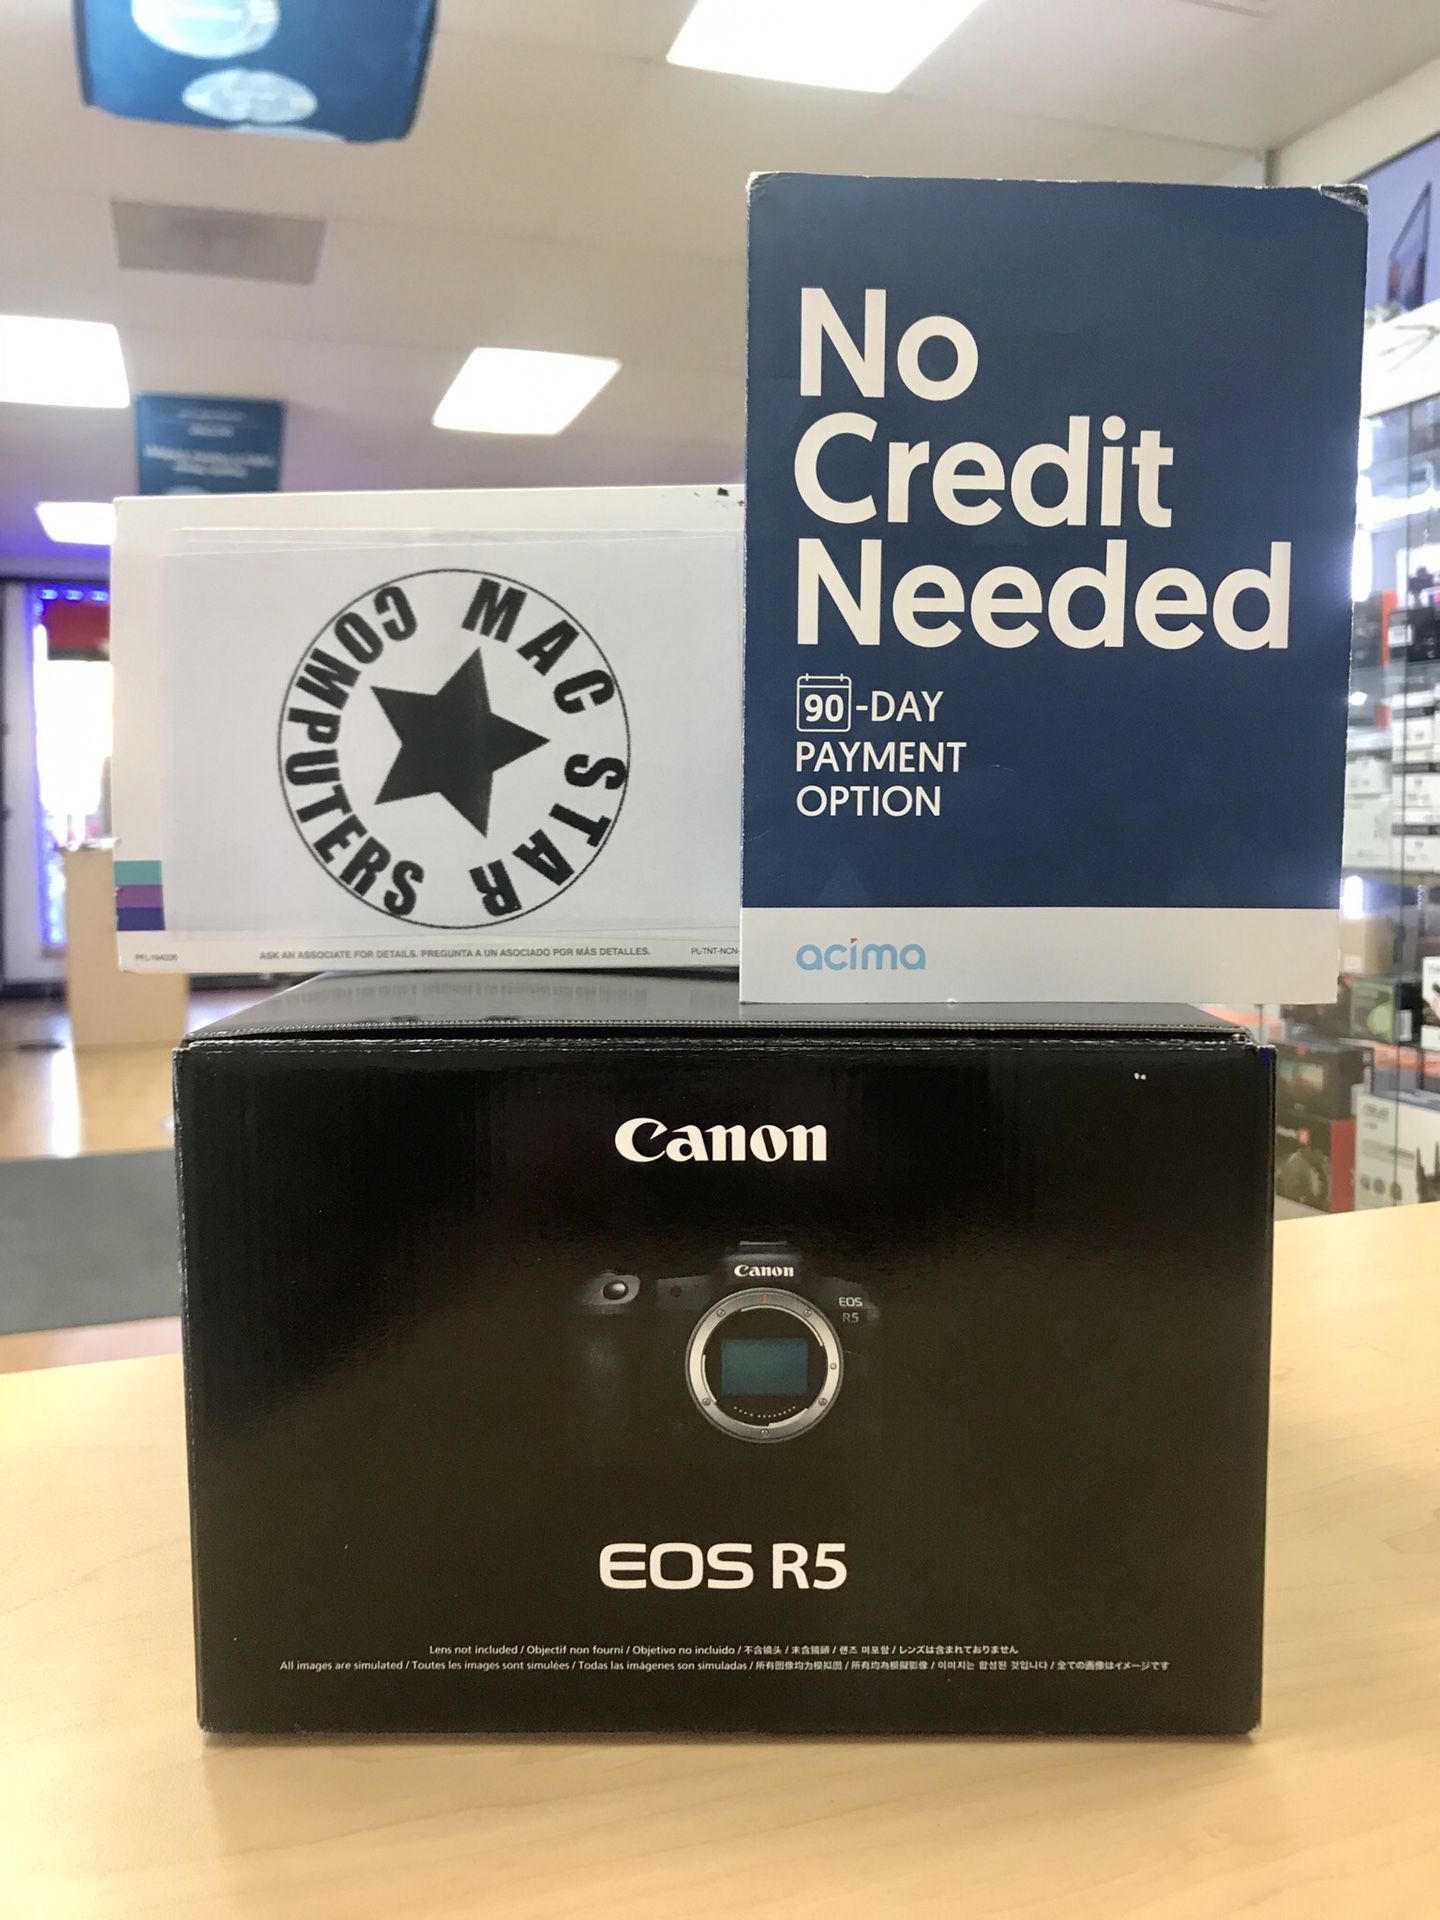 CANON EOS R5 Body Only Available In Stock with Down Payment of